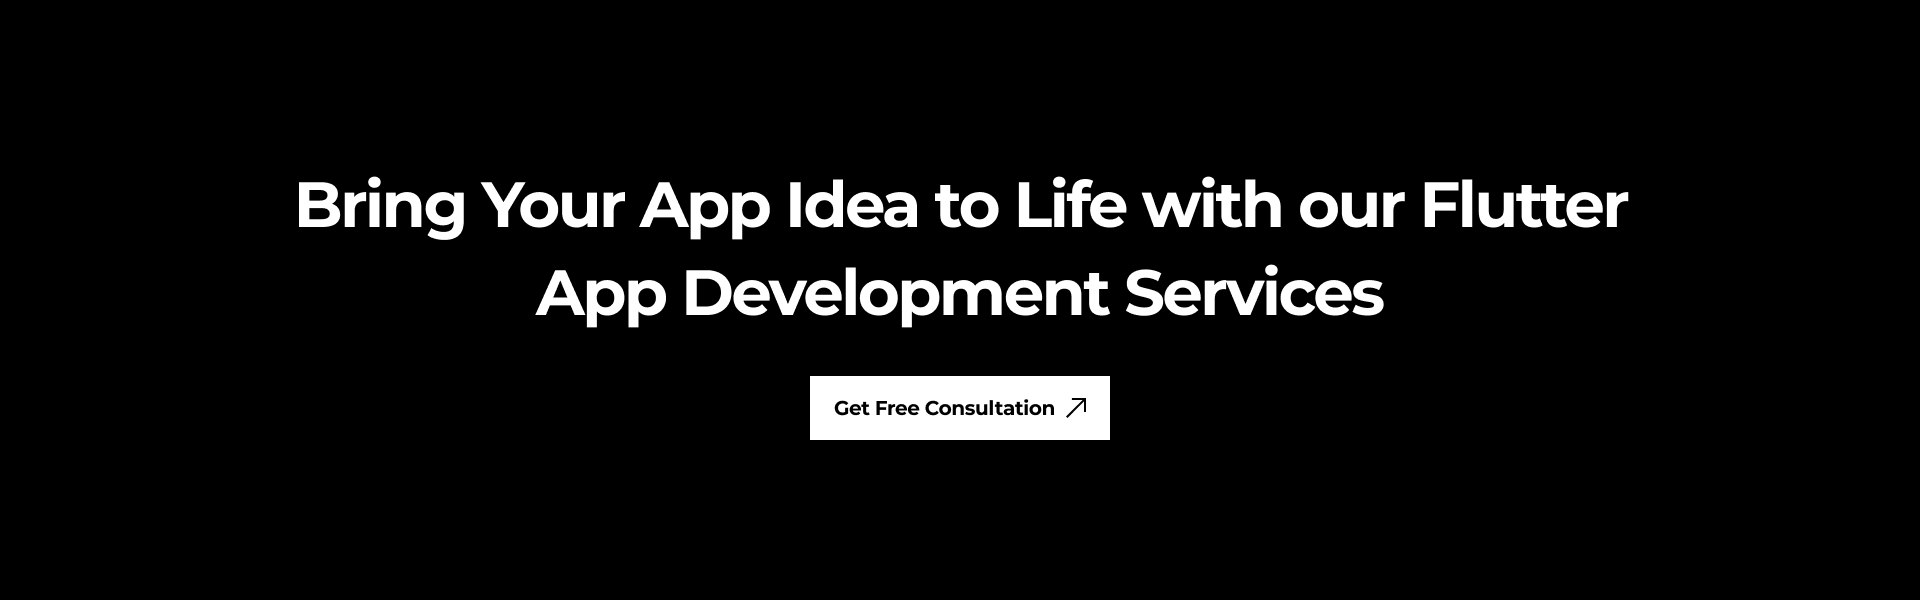 Bring Your App Idea to Life with our Flutter App Development Services